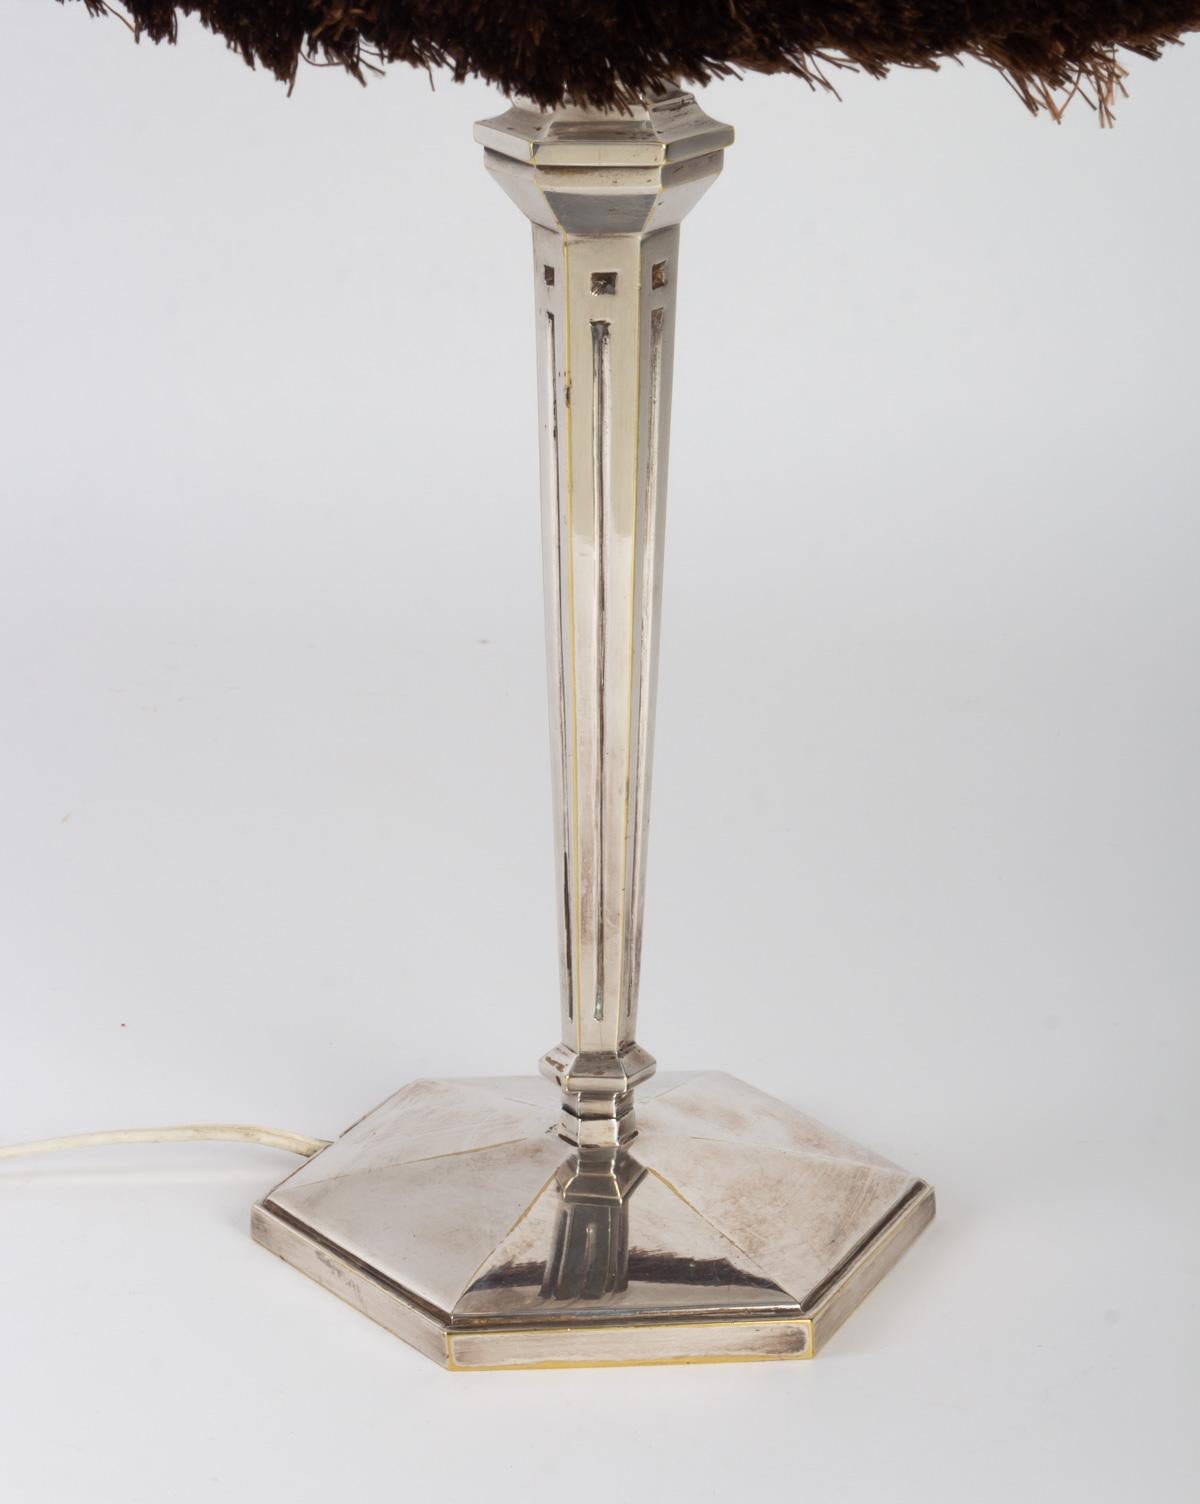 Lamp 1930, silverfoot, lampshades redone in the Rhulmanian style
Measures: H 45cm, D 34cm.